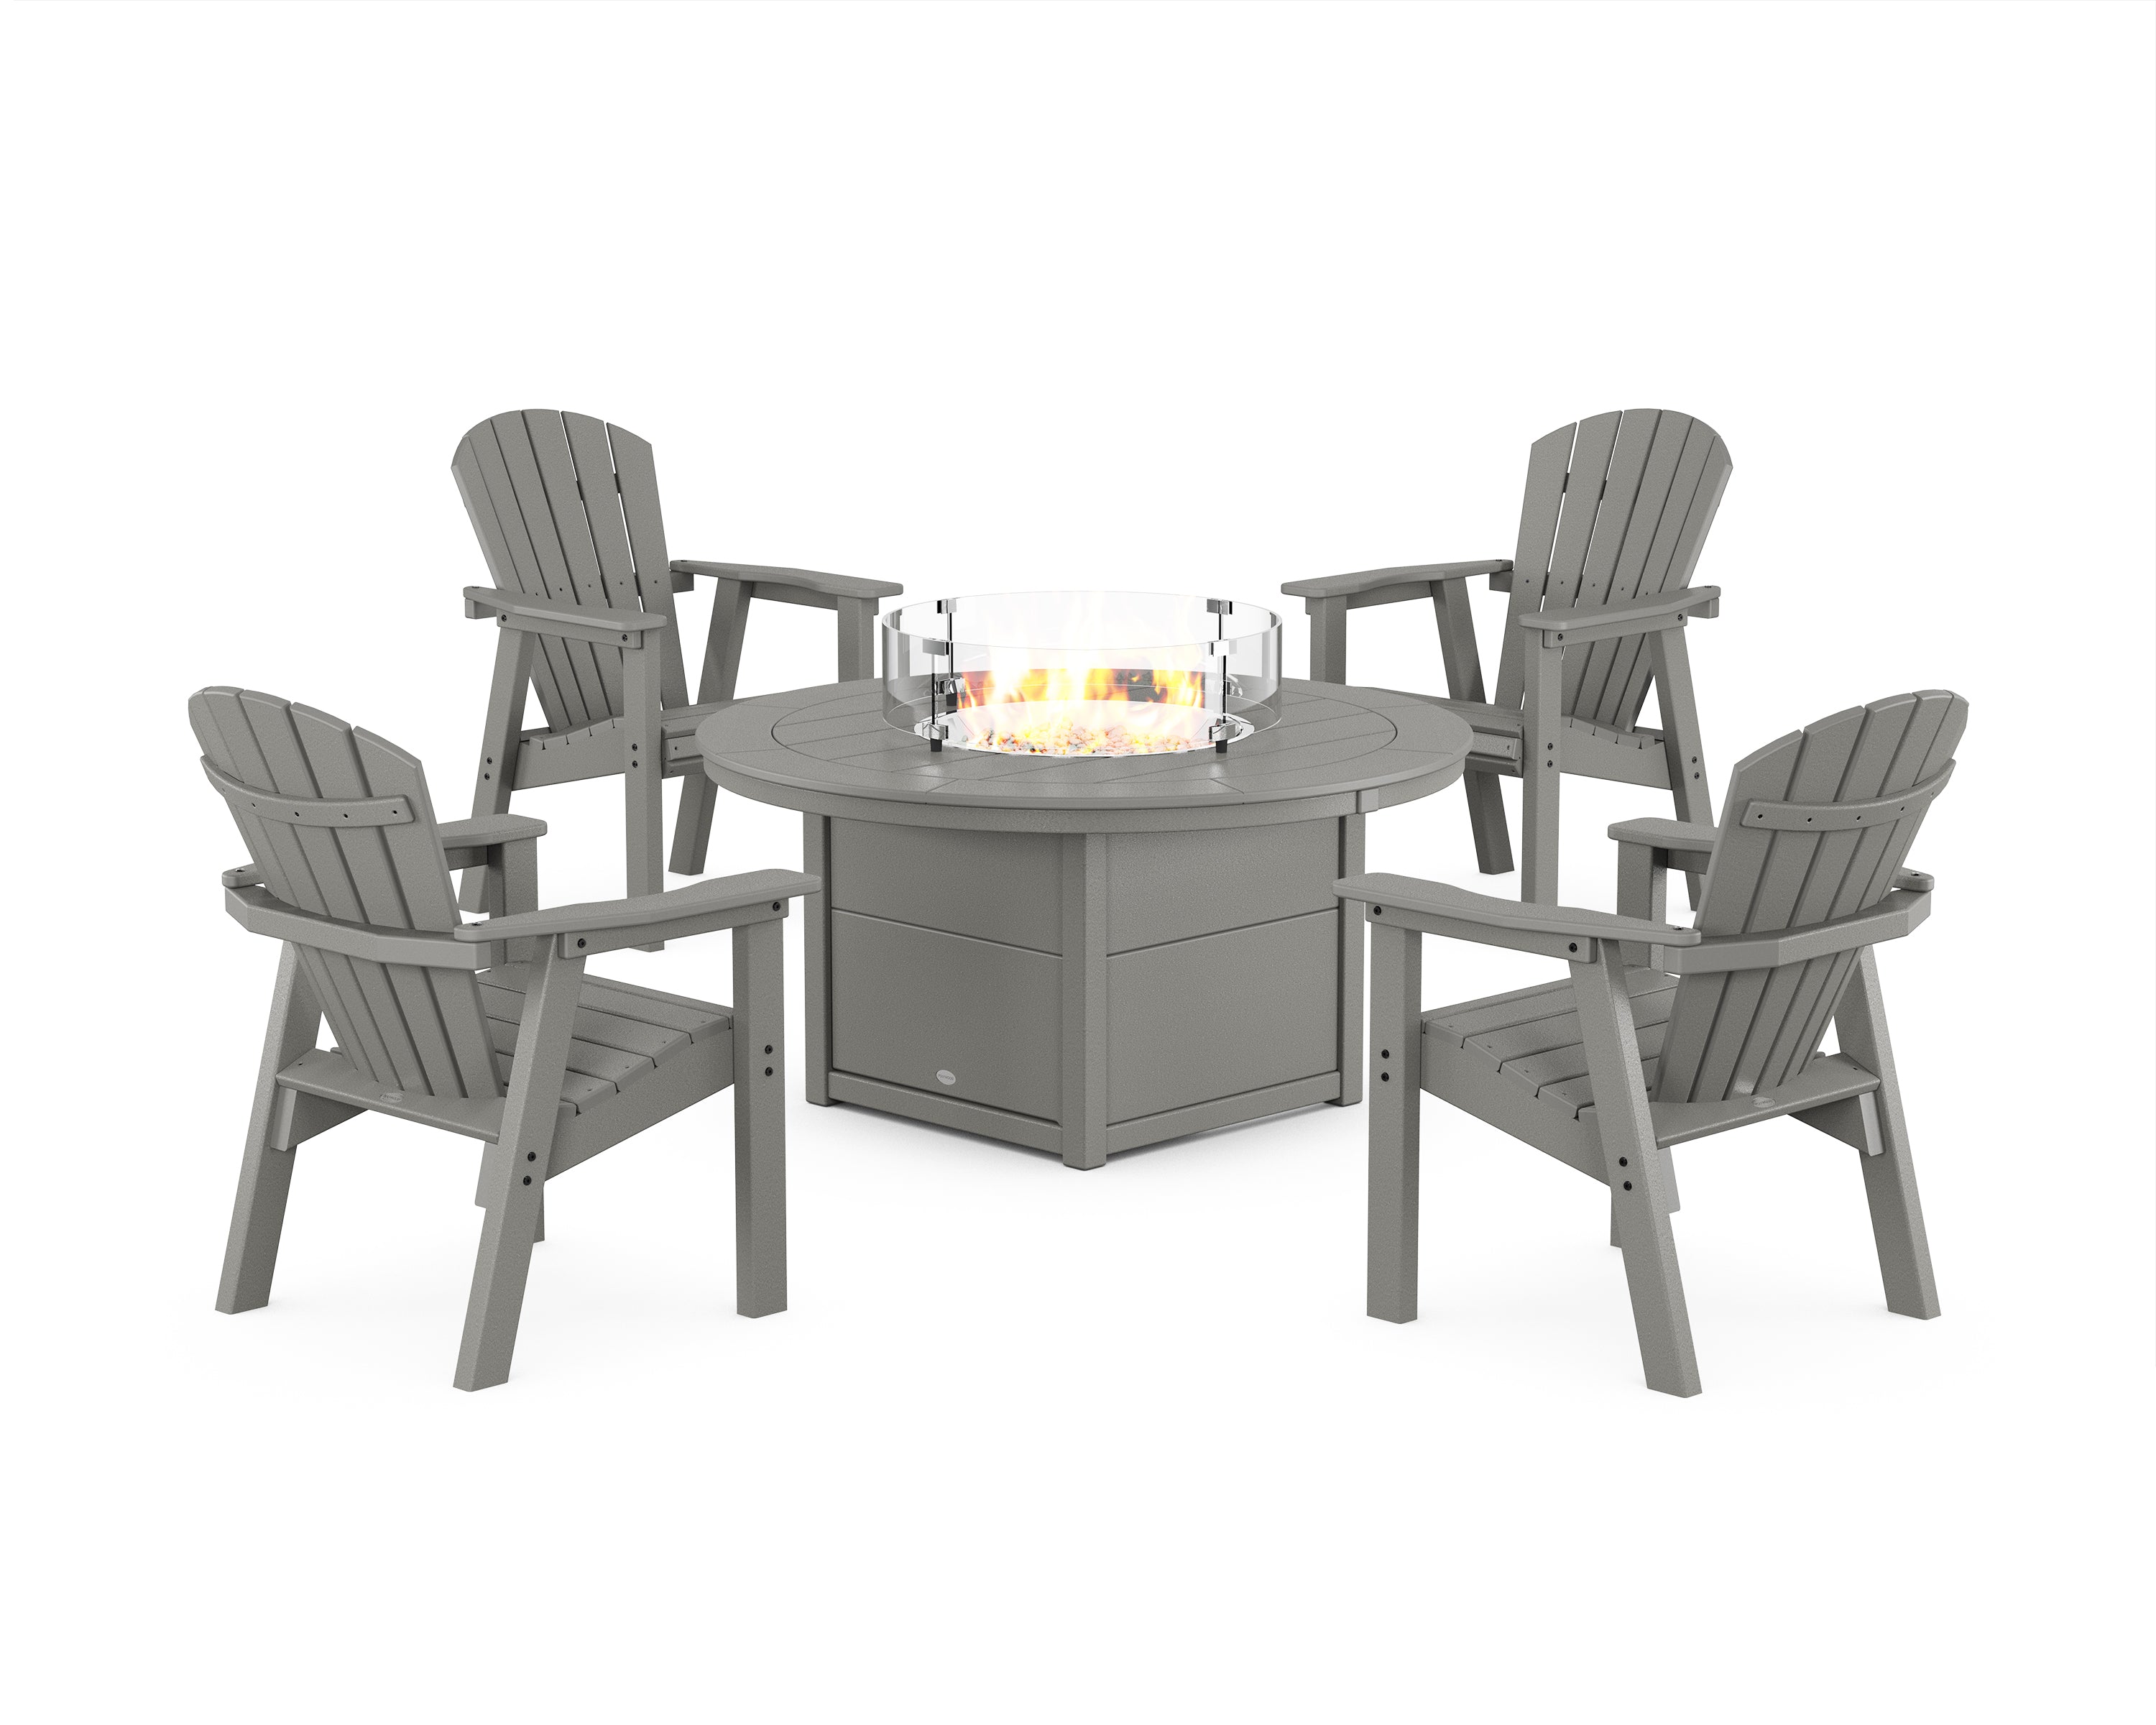 POLYWOOD® Seashell 4-Piece Upright Adirondack Conversation Set with Fire Pit Table in Slate Grey